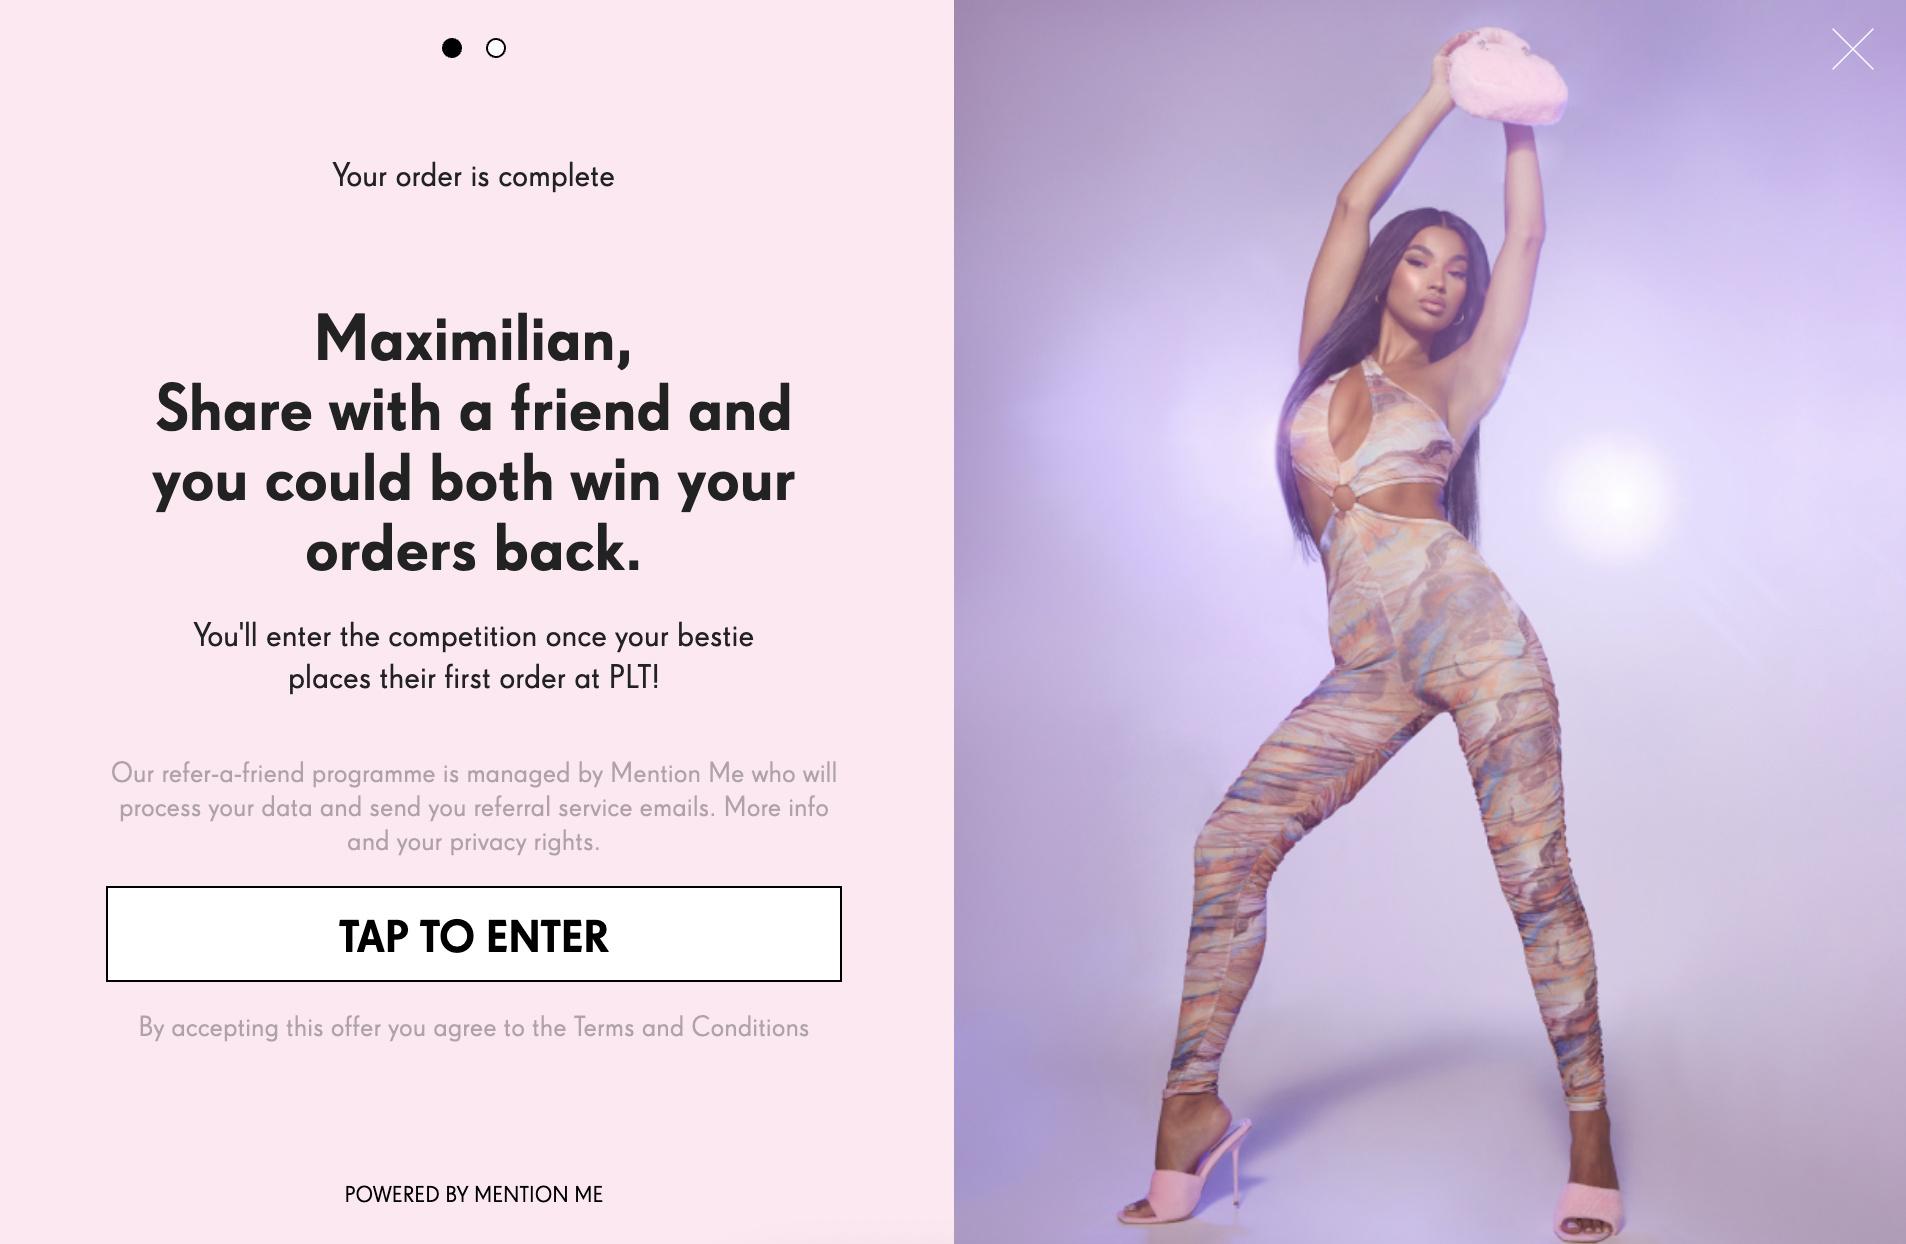 PrettyLittleThing celebrated "Pink Friday" with a referral competition